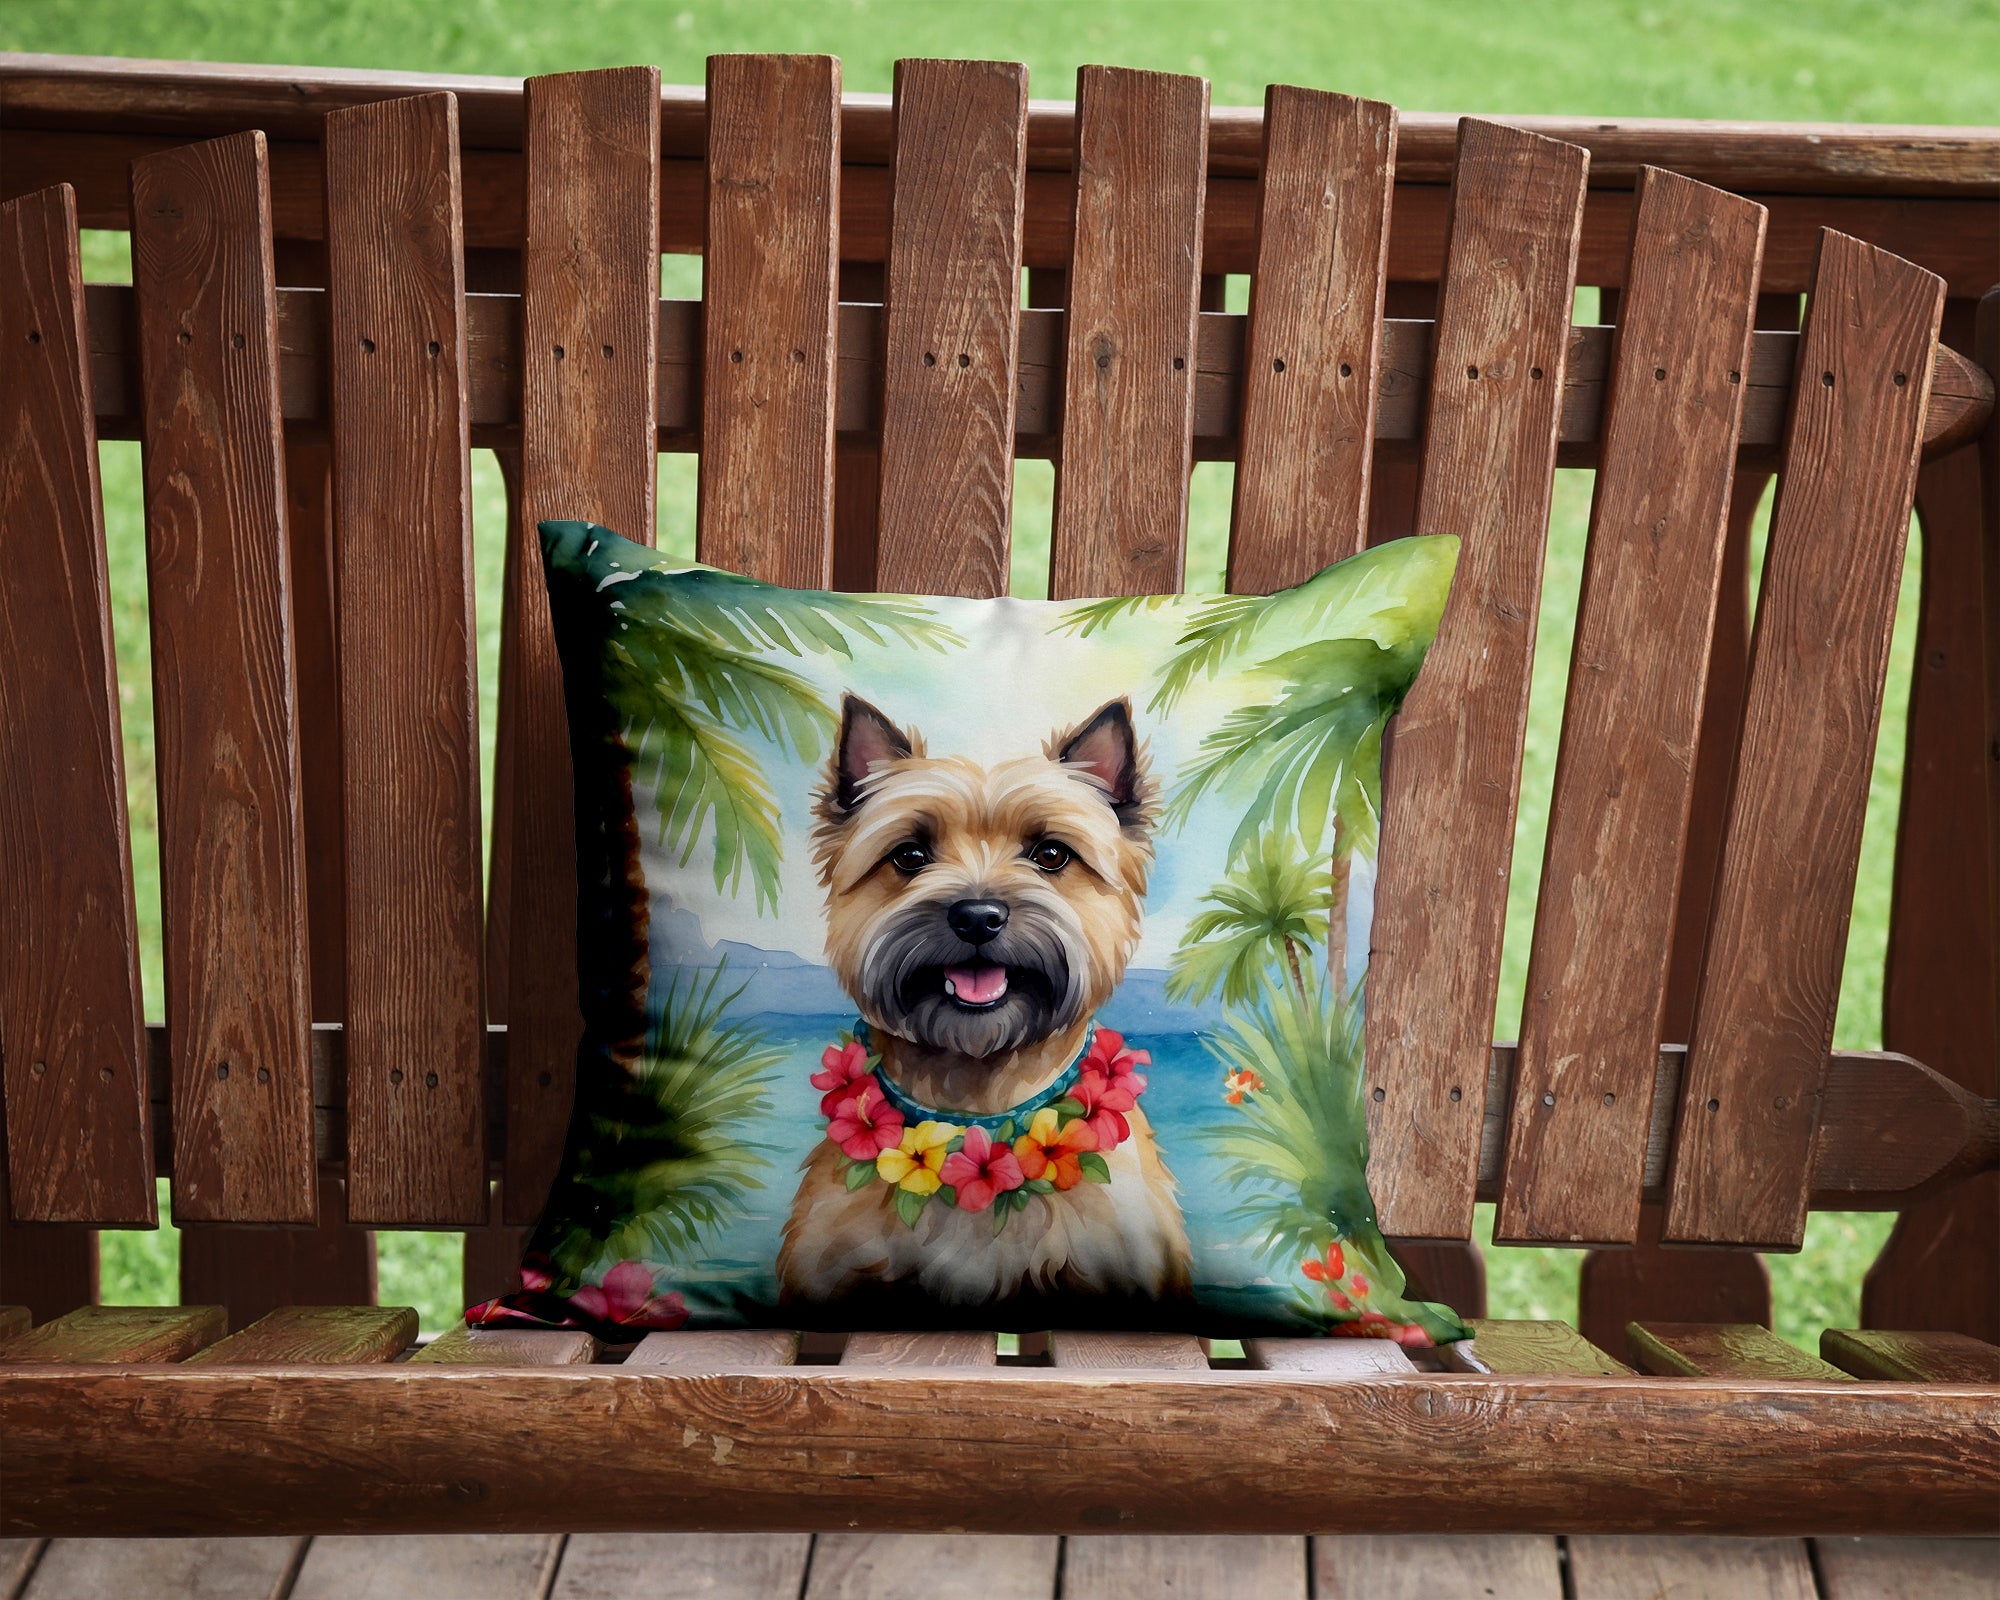 Buy this Cairn Terrier Luau Throw Pillow